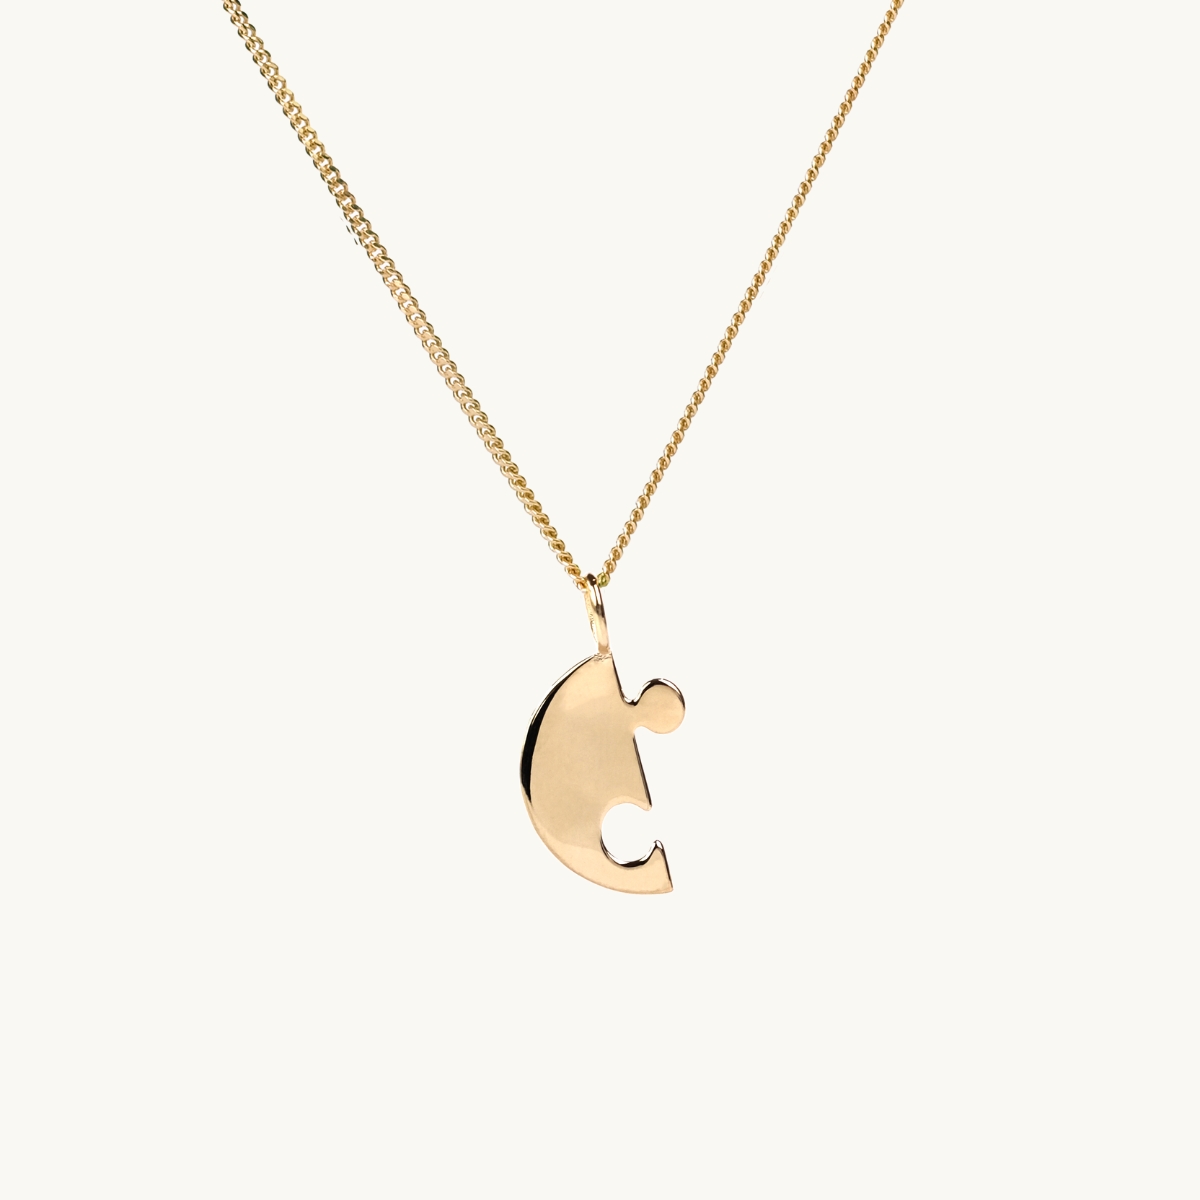 A puzzle necklace in gold